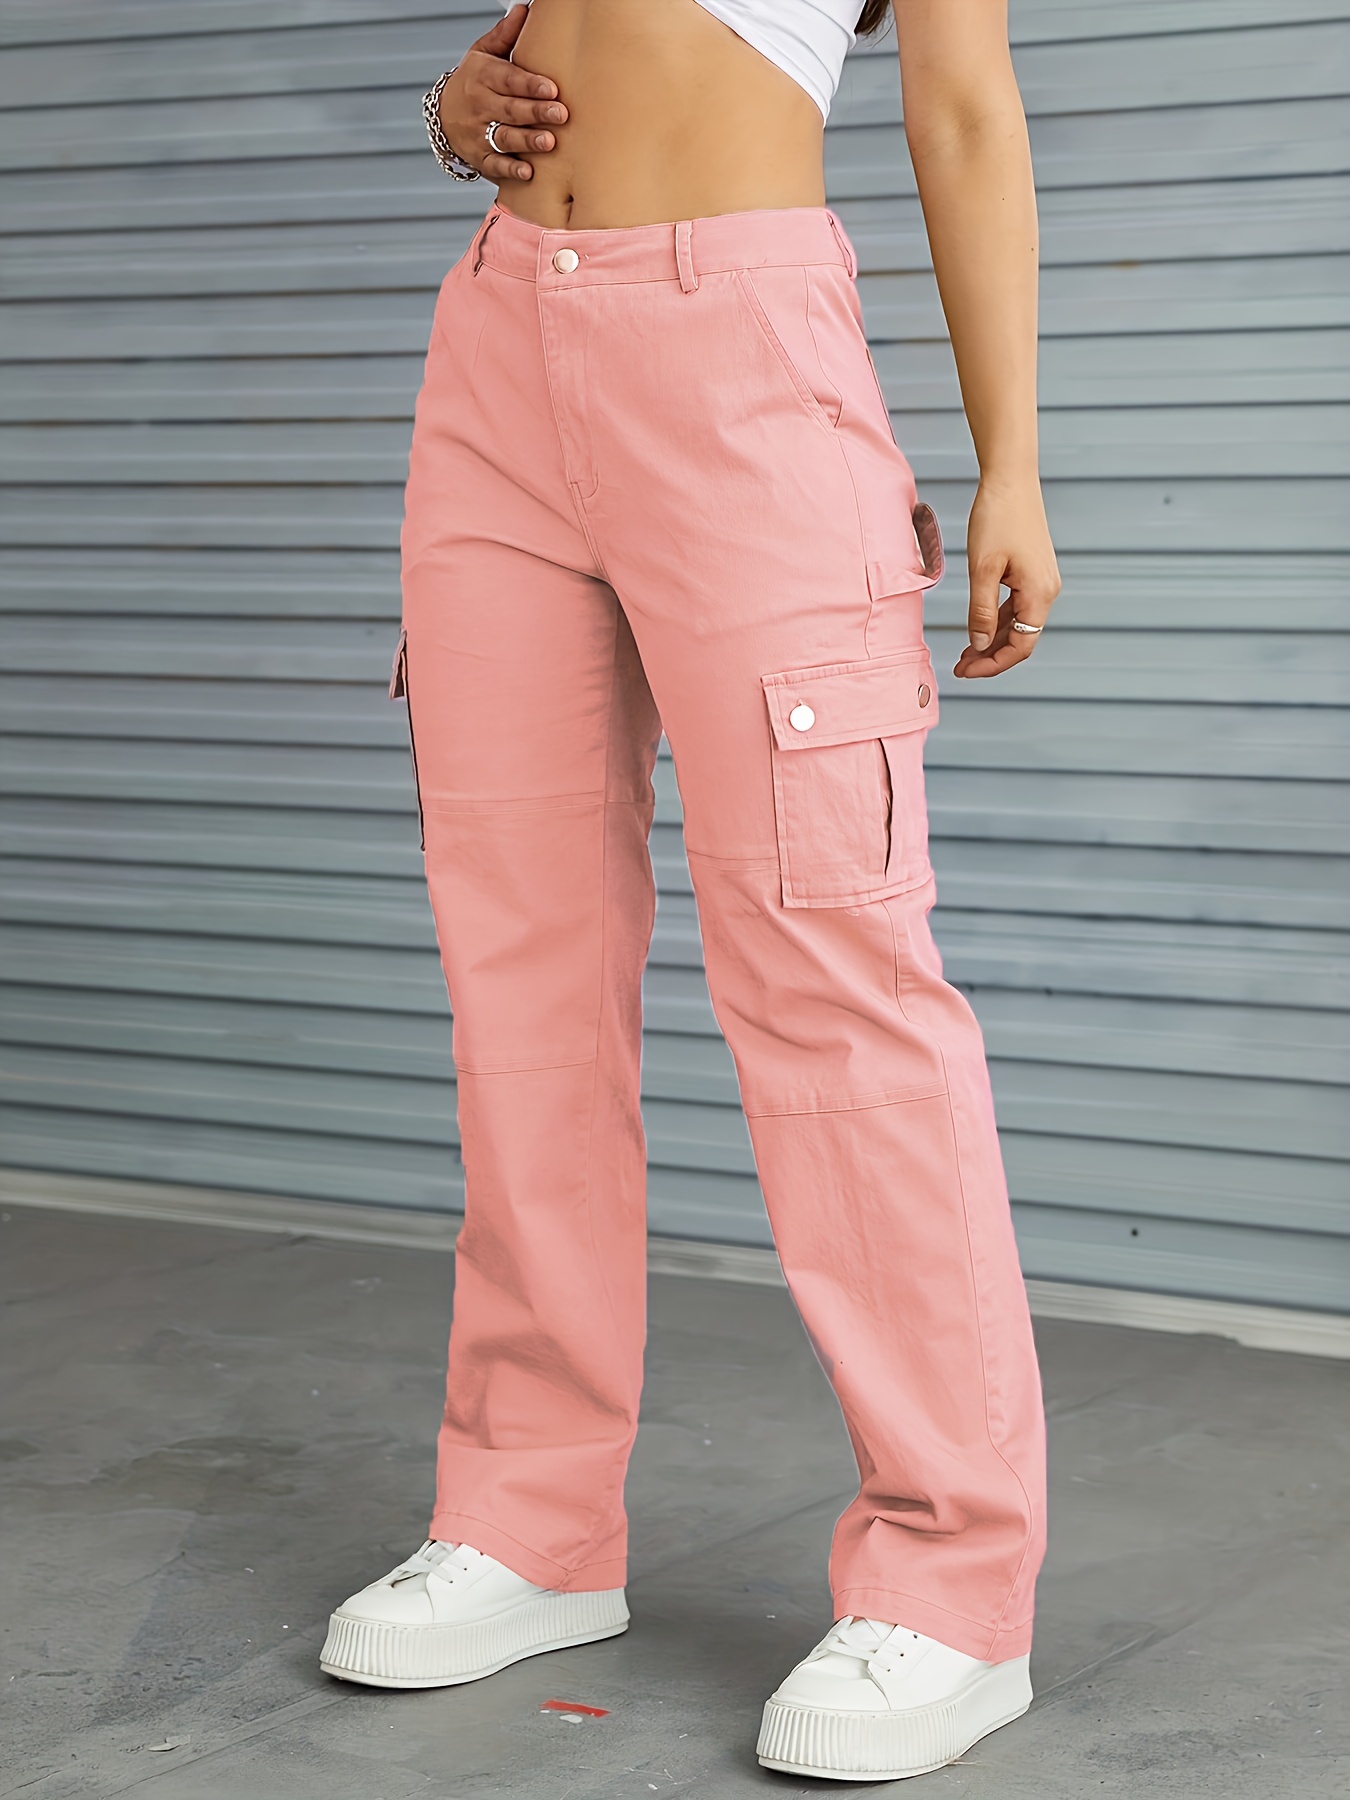 Light pink women's cargo pants with pockets - Clothing Light pink